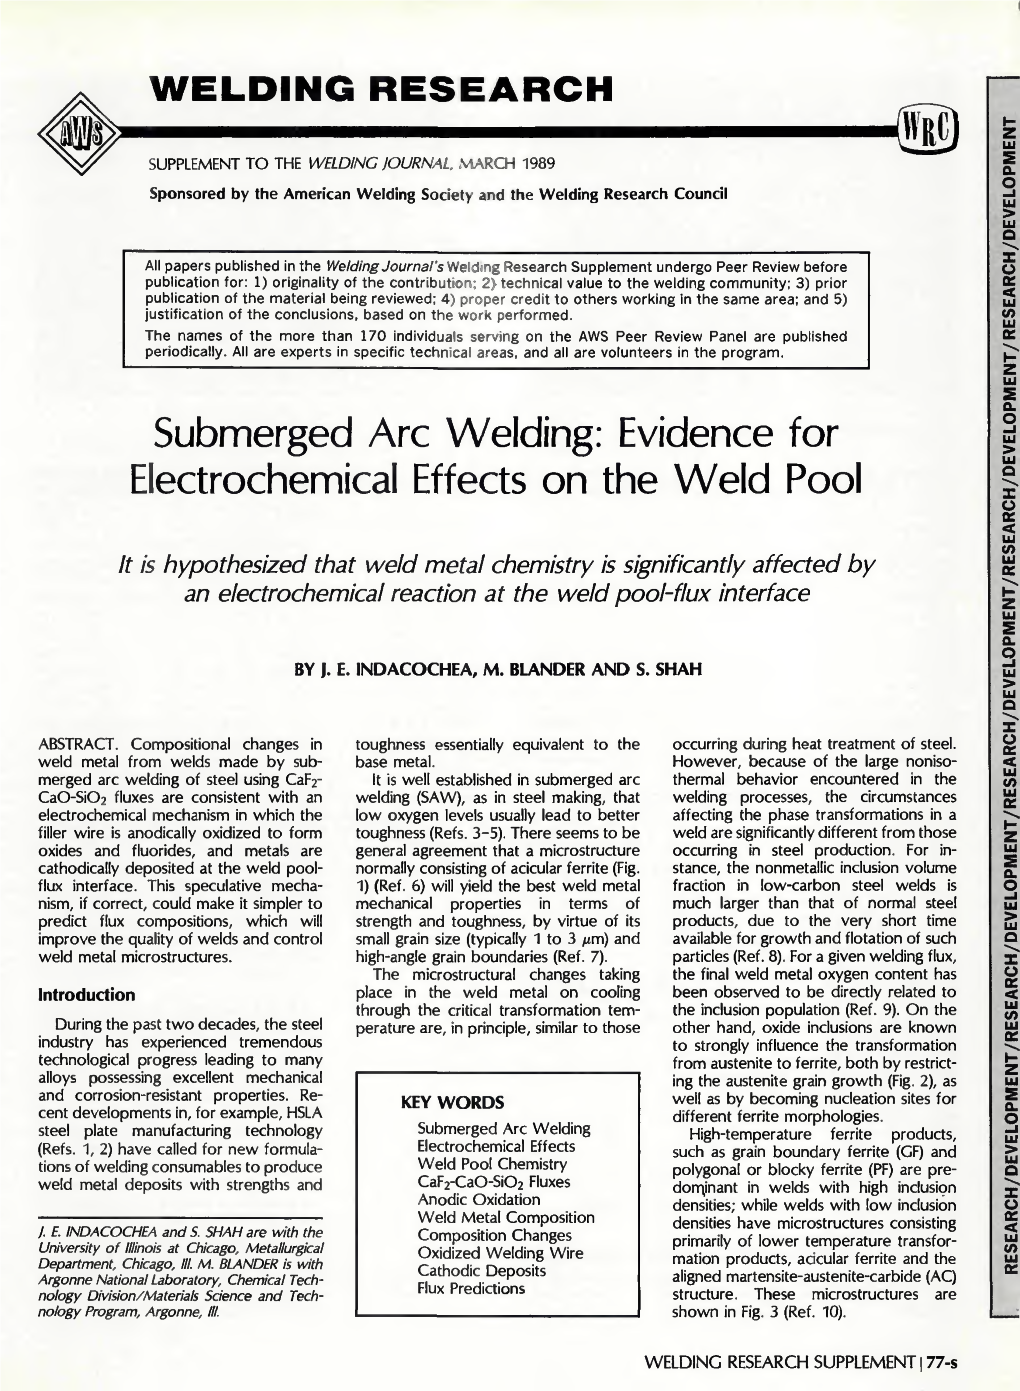 Submerged Arc Welding: Evidence for Electrochemical Effects on the Weld Pool